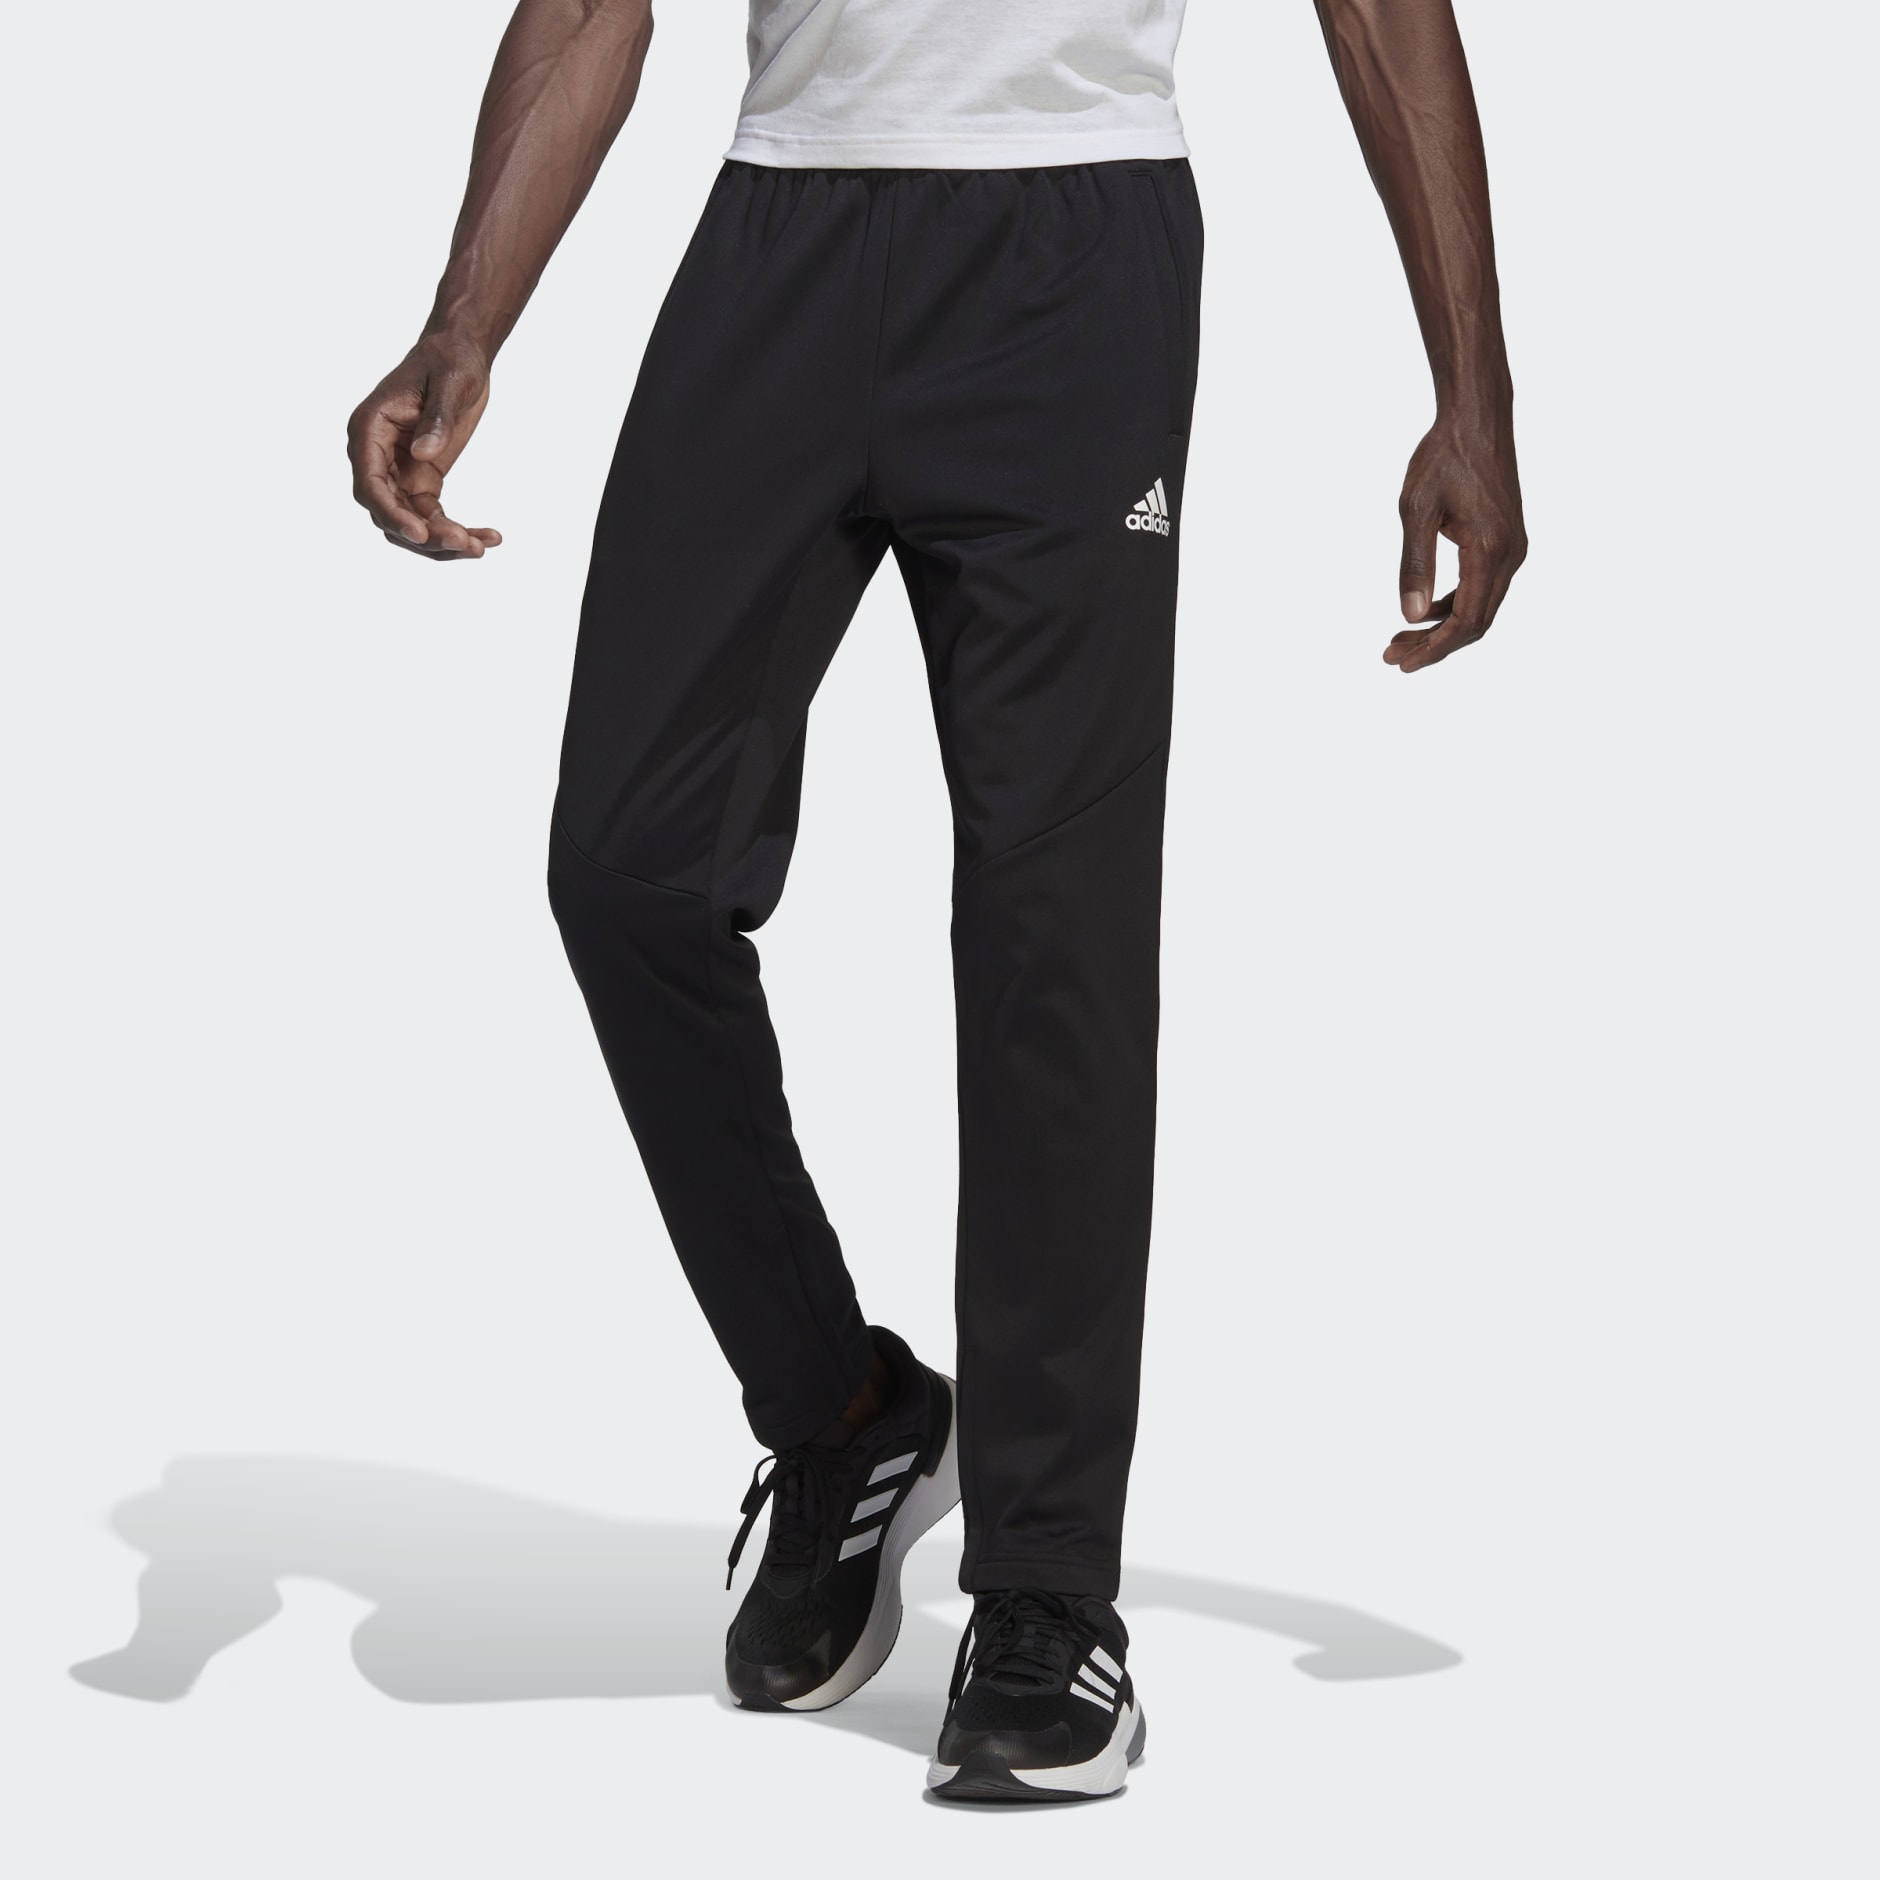 Echter Chemie Vermaken adidas AEROREADY Game and Go Small Logo Tapered Pants - Black | adidas SA